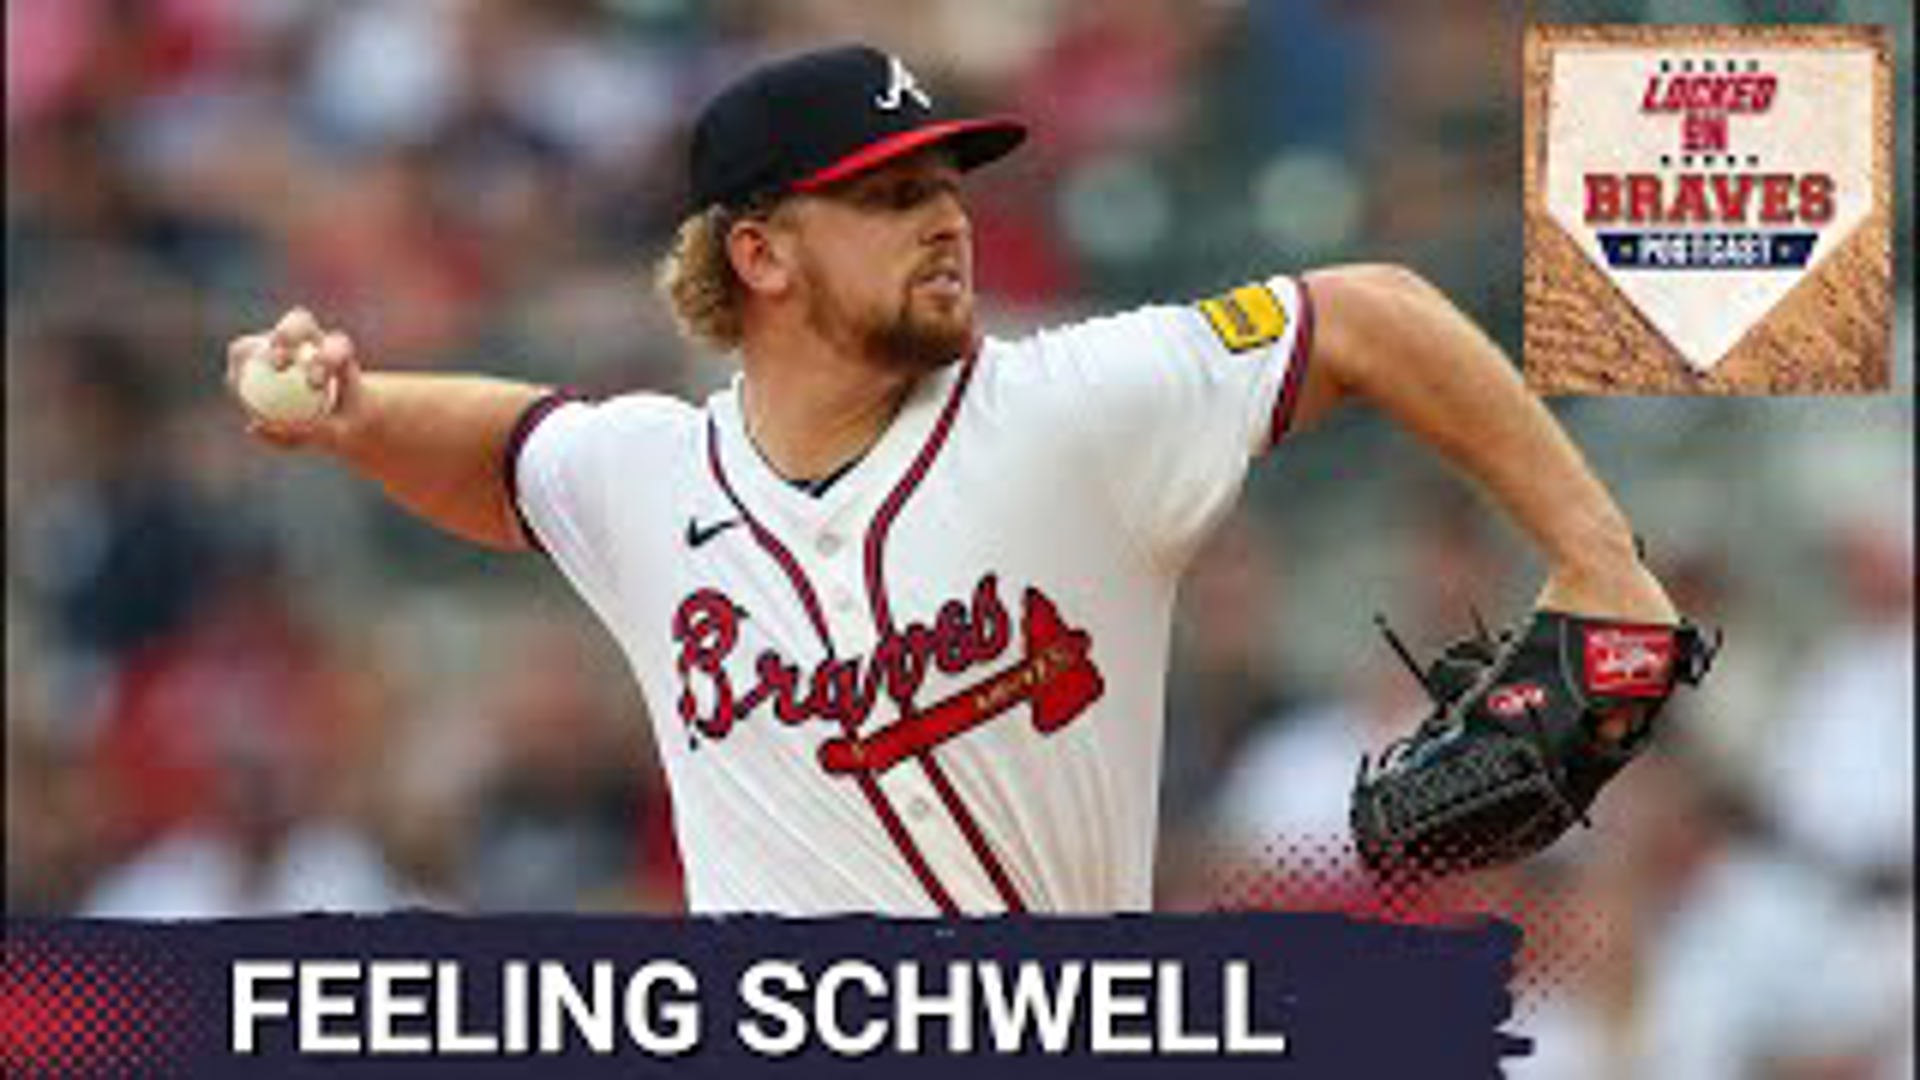 Rookie Spencer Schwellenbach fired six strong innings to earn his first victory in the big leagues as the Atlanta Braves scored early and held off the Detroit Tigers